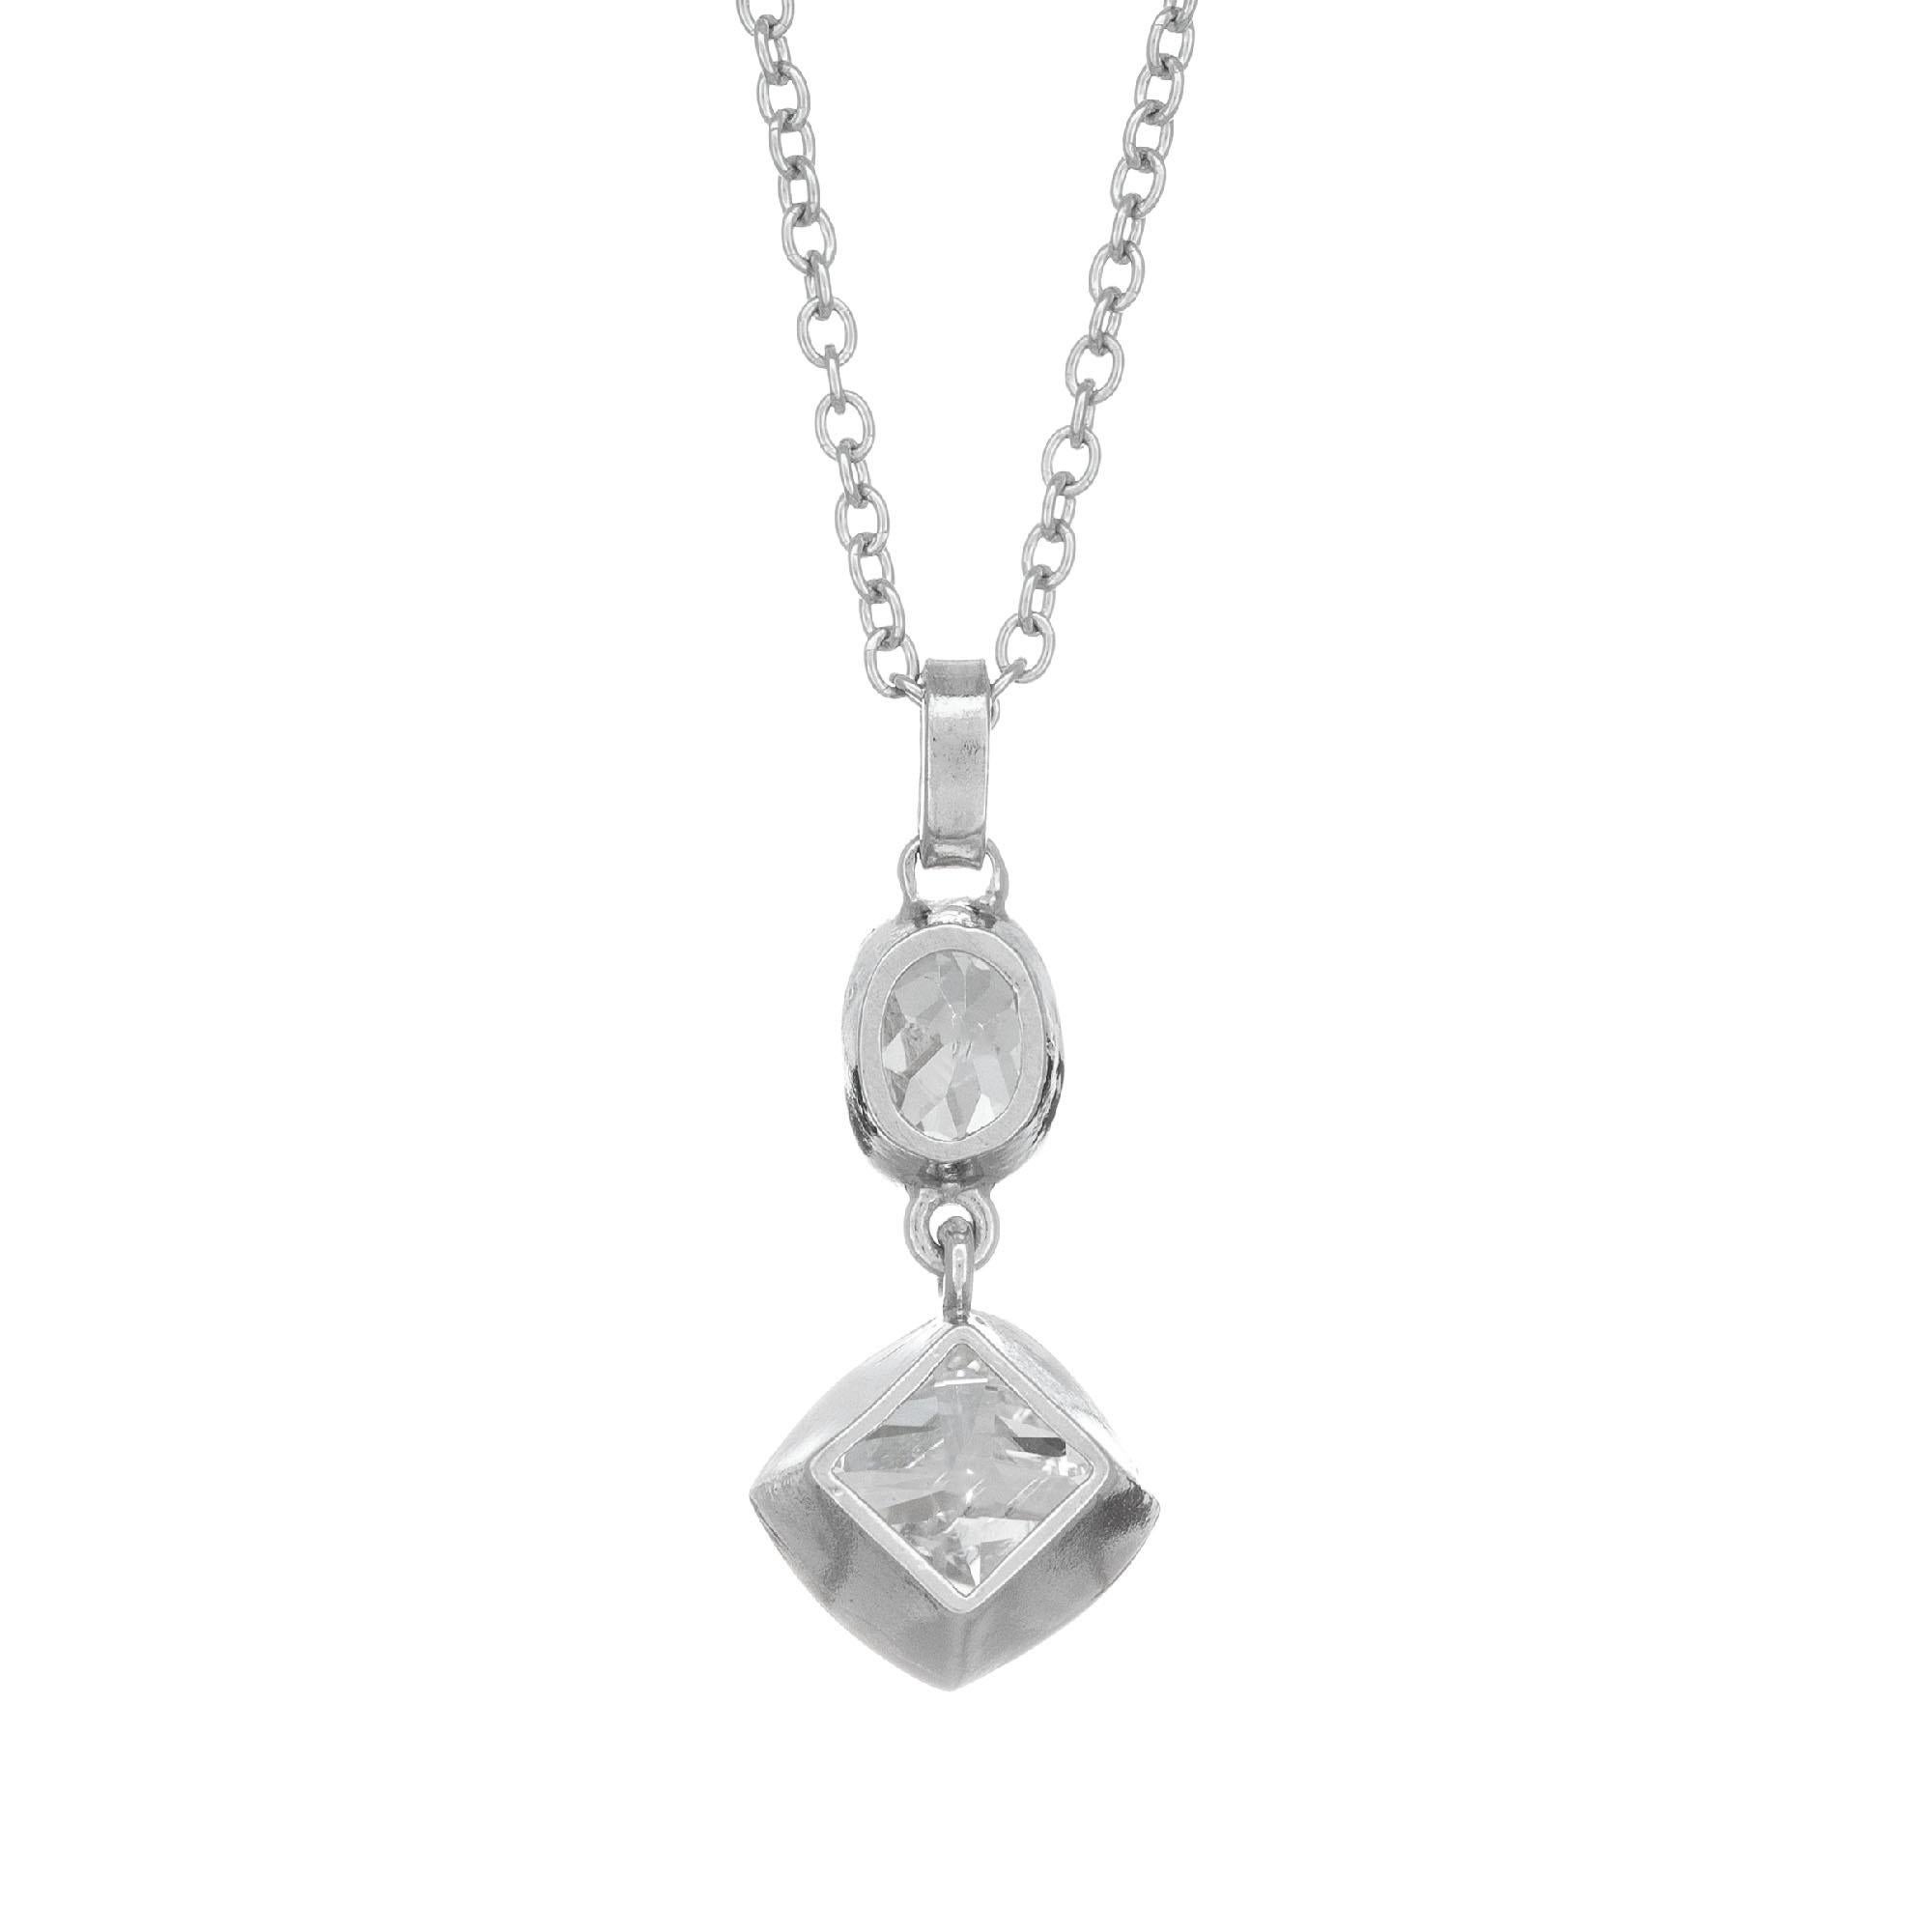 Peter Suchy GIA Certified 1.11 Carat Diamond Platinum Pendant Necklace In New Condition For Sale In Stamford, CT